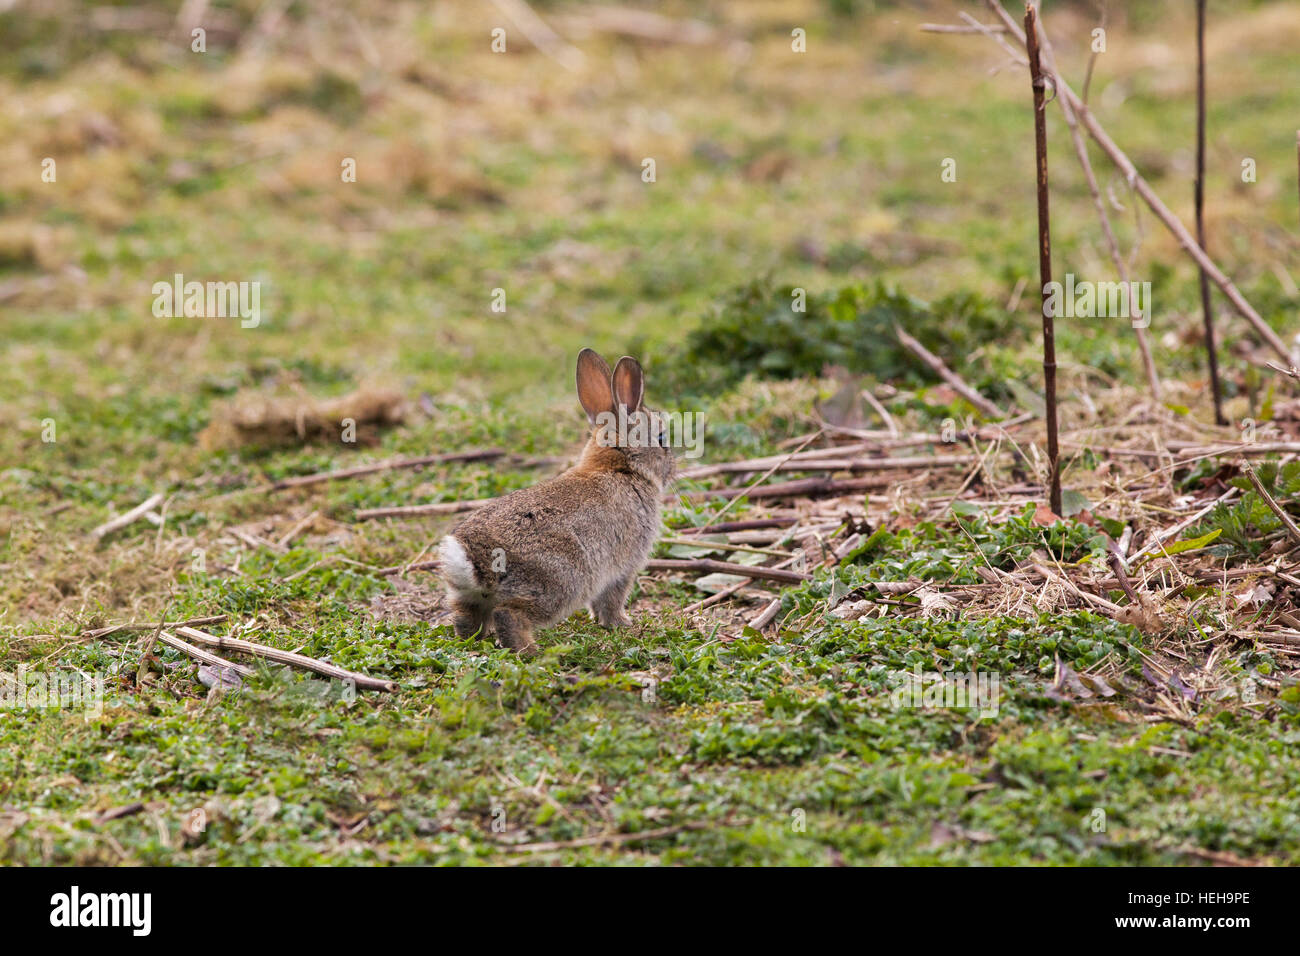 European Rabbit (Oryctolagus cuniculus). lerted to perceived possible danger. From rear view note raised white scut or tail, back feet about to thump Stock Photo